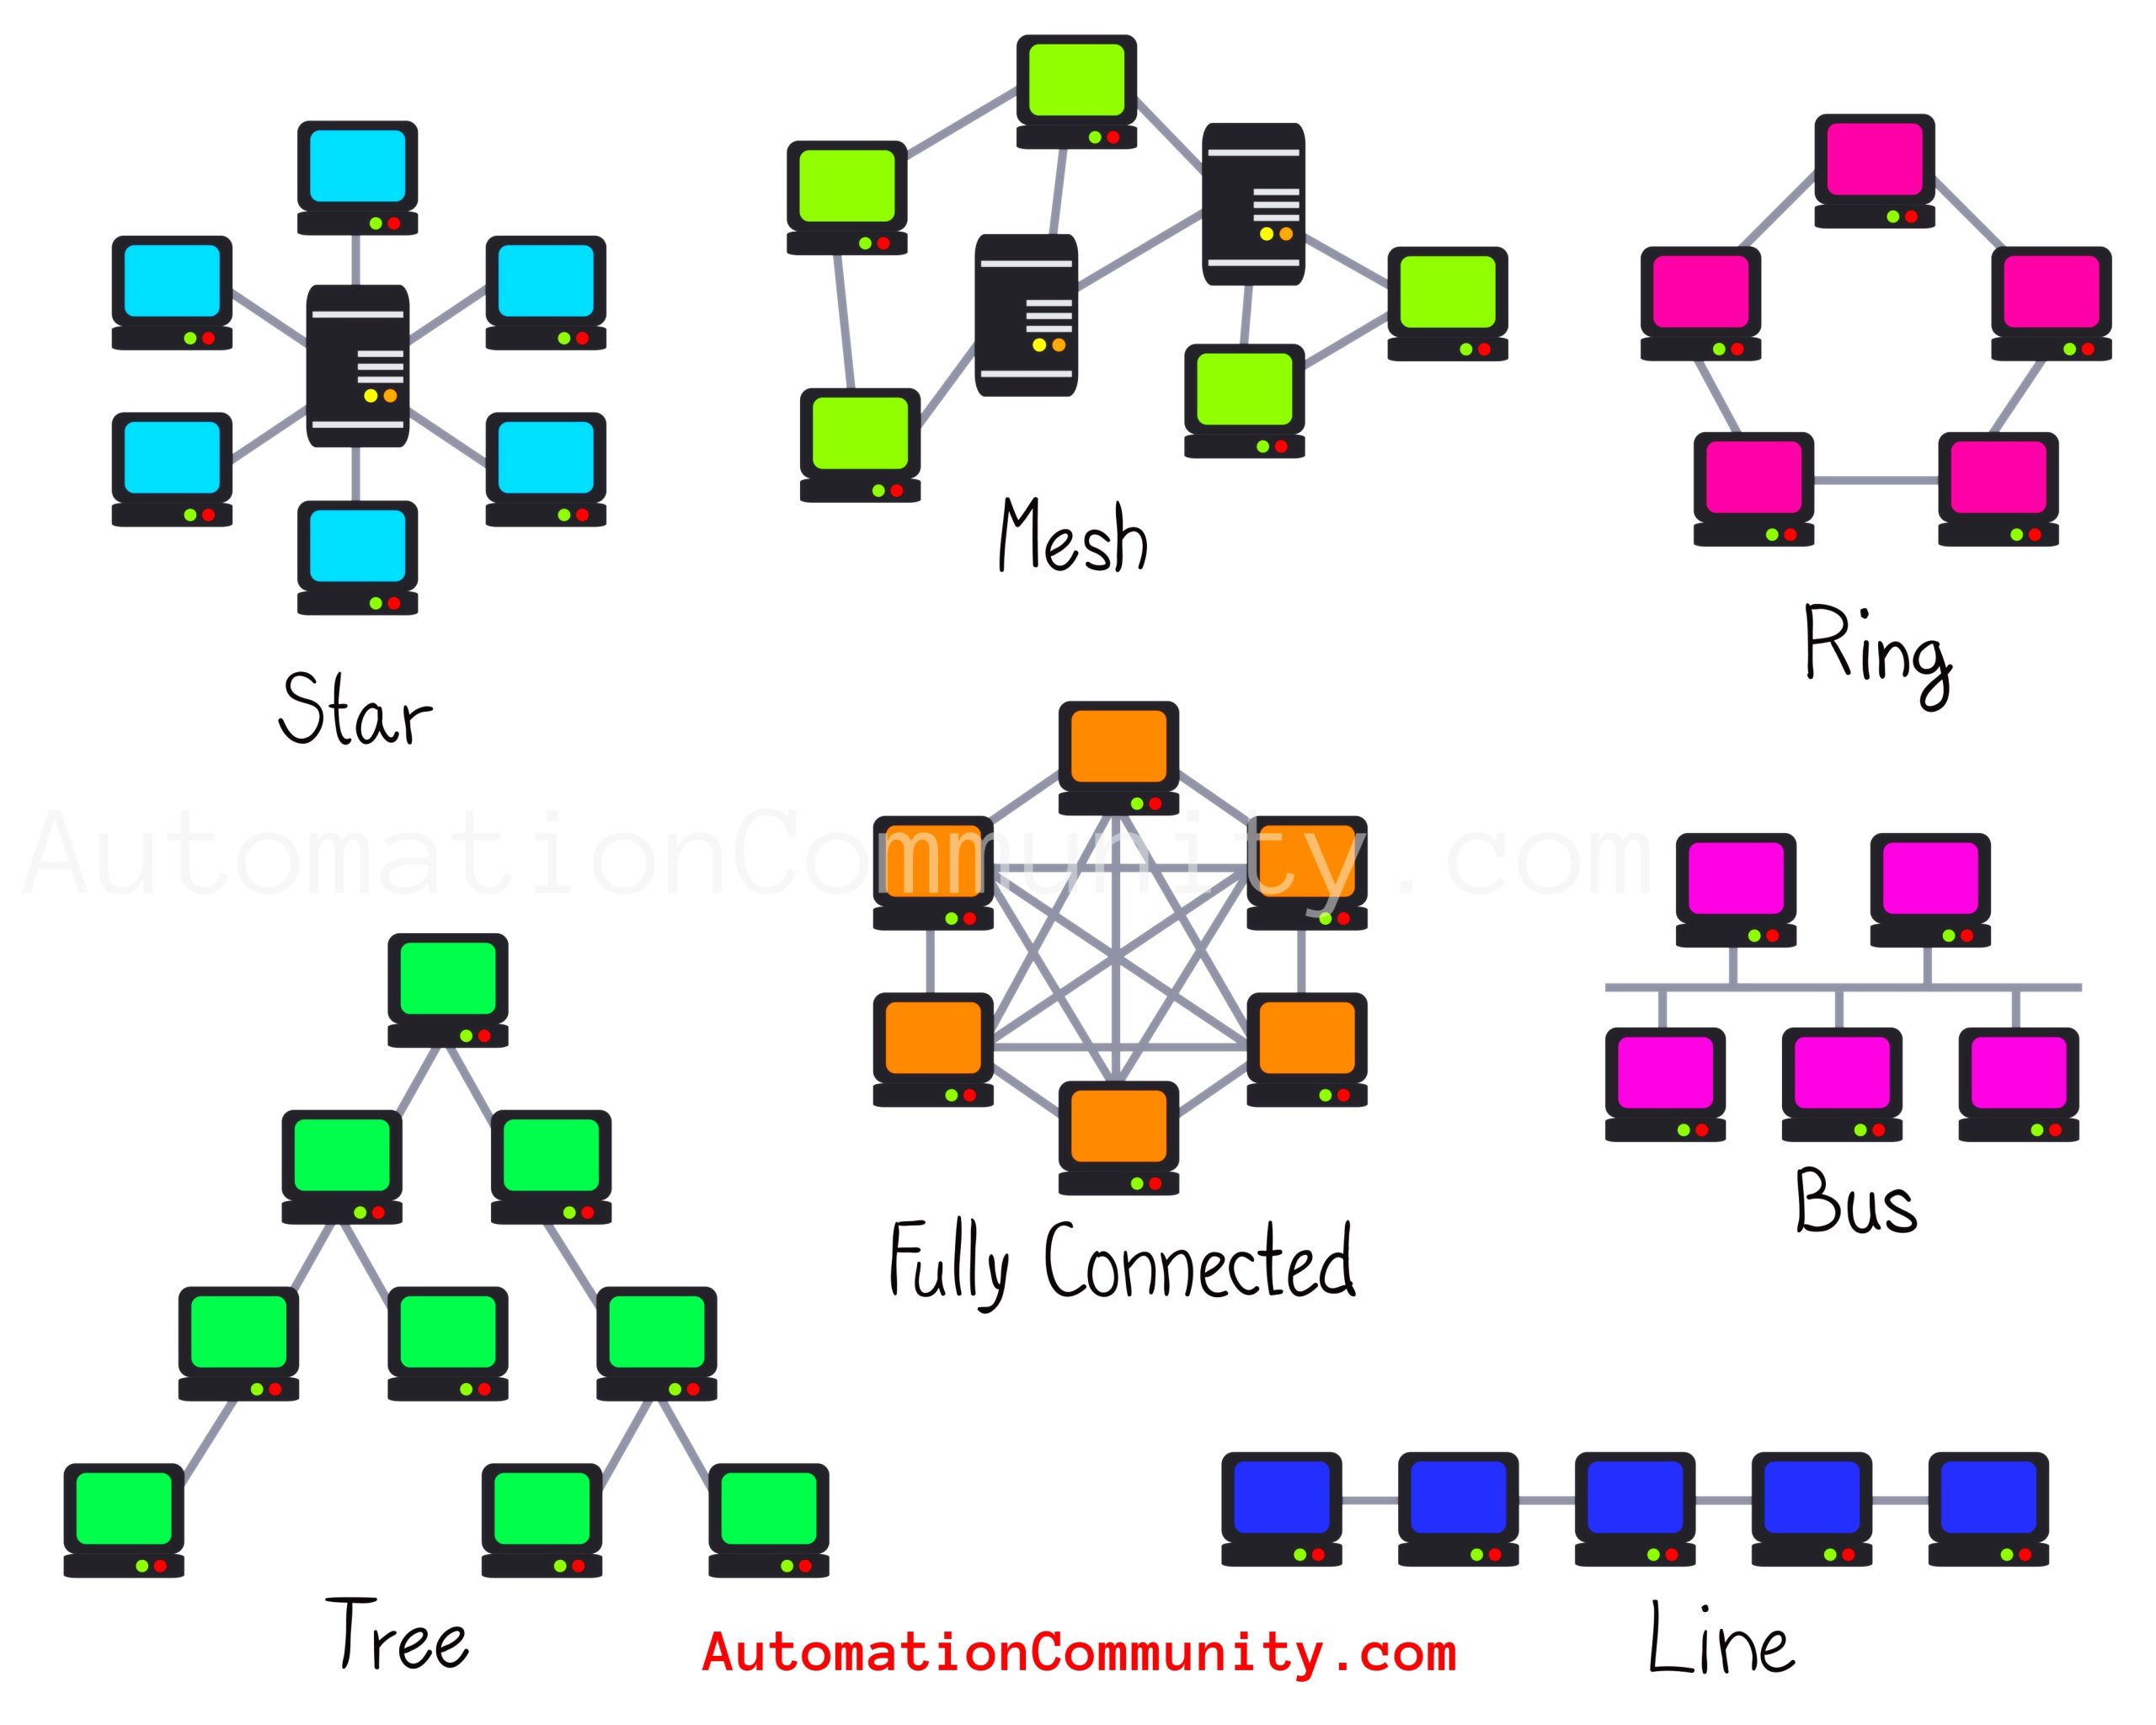 Computer Engineering Concepts - 9.1 Network Topologies